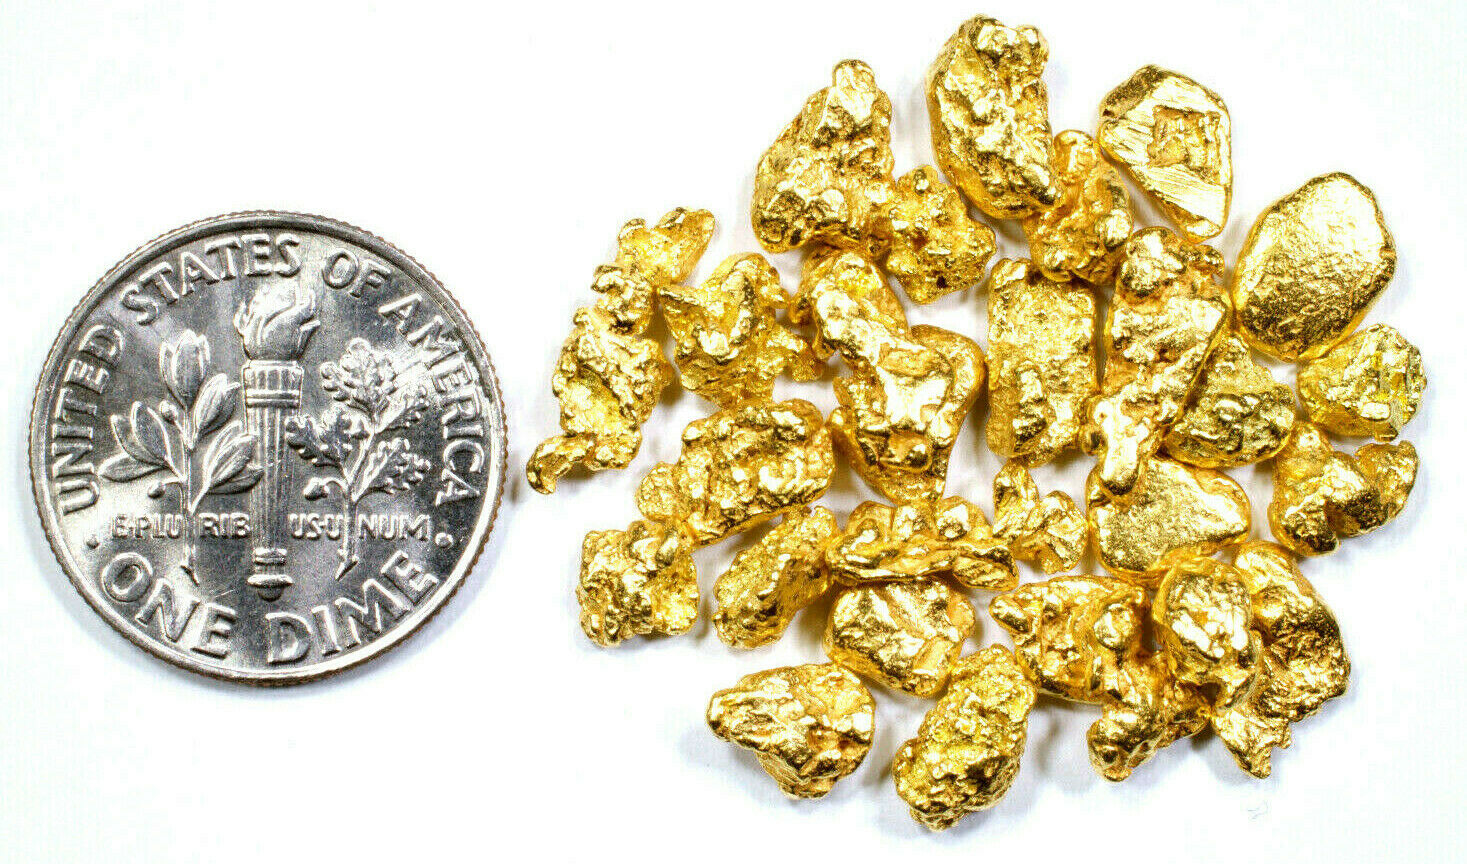 Wholesale Gold Nuggets For Sale (Troy Oz)